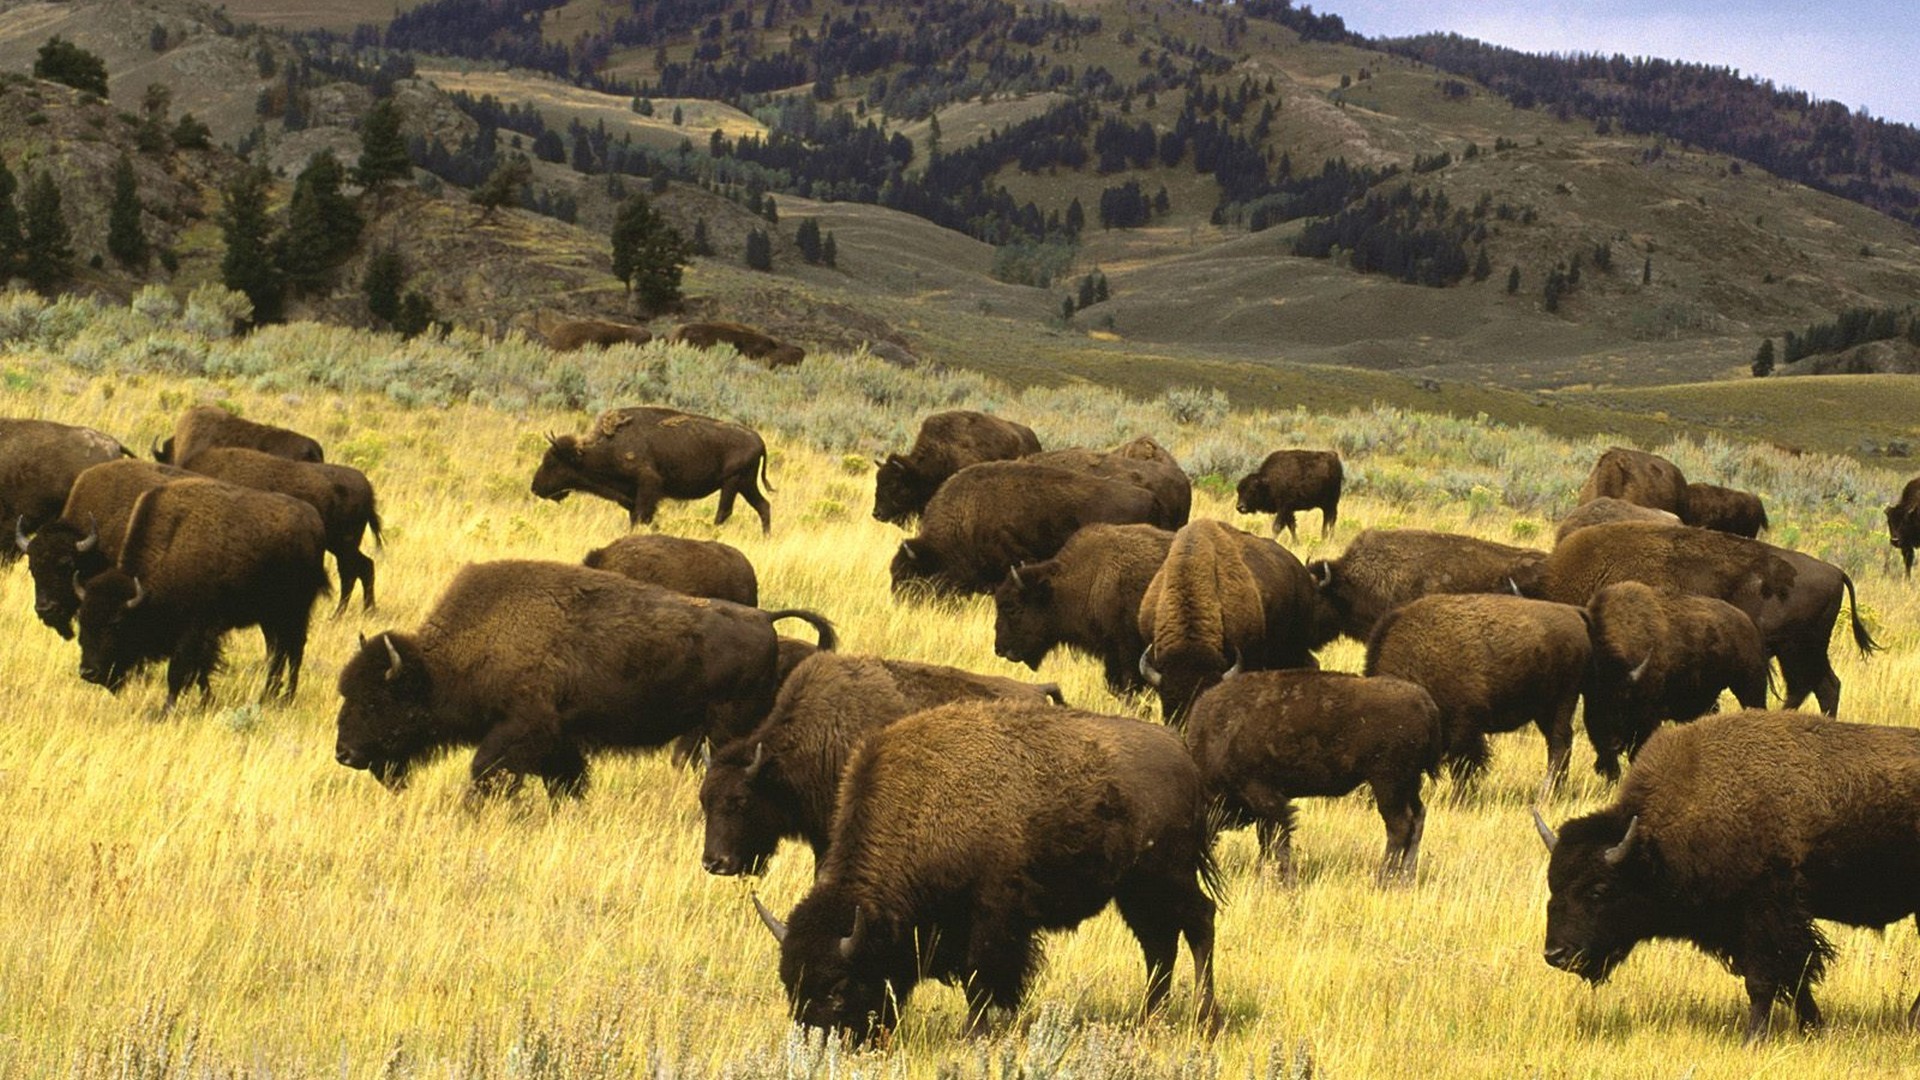 Fields Wyoming Yellowstone National Park Bison Wallpaper Background